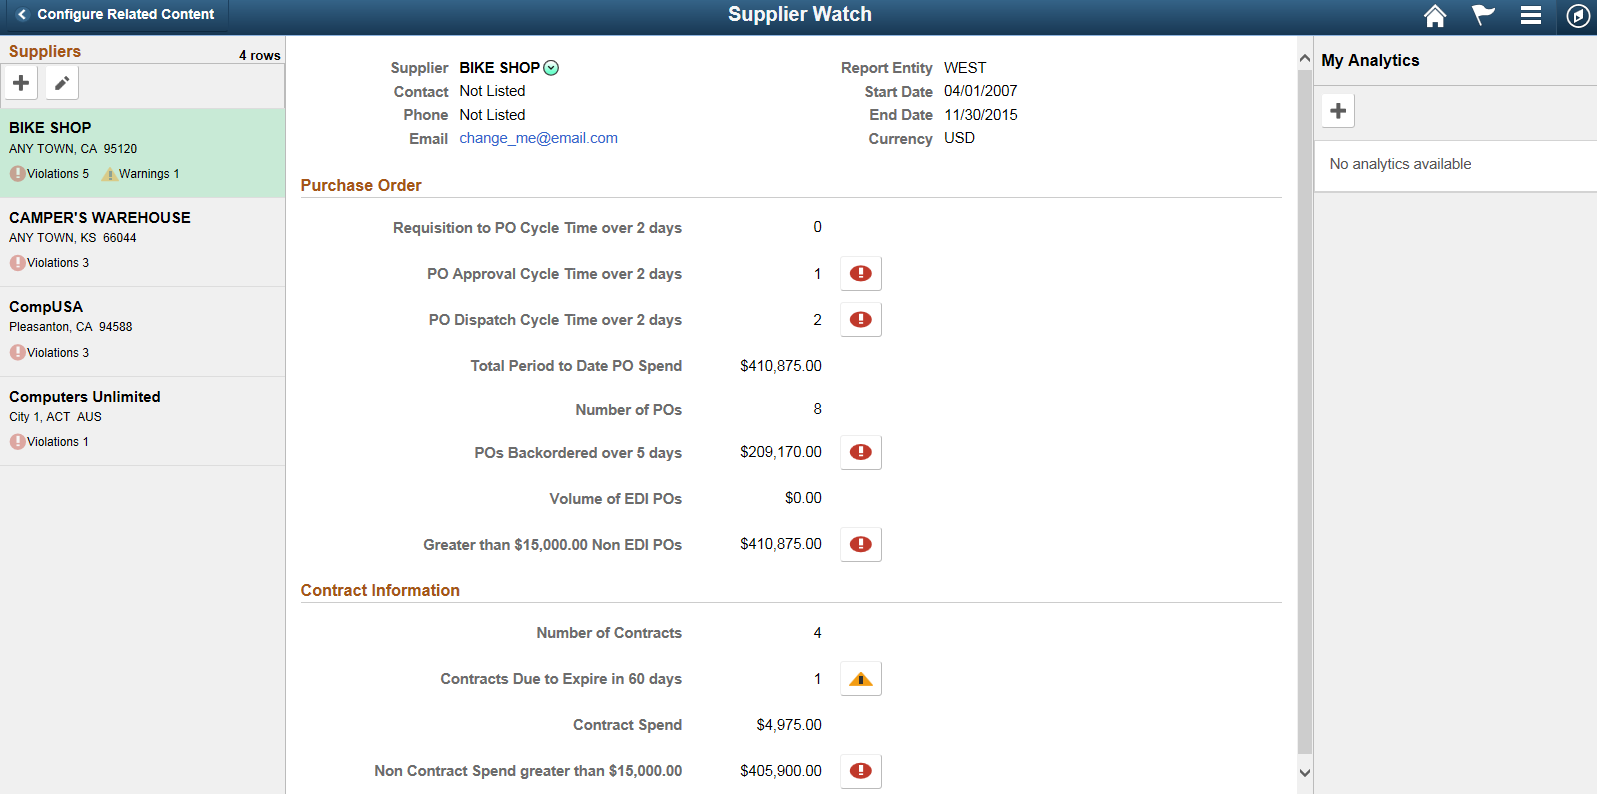 Supplier Watch page displaying the My Analytics section